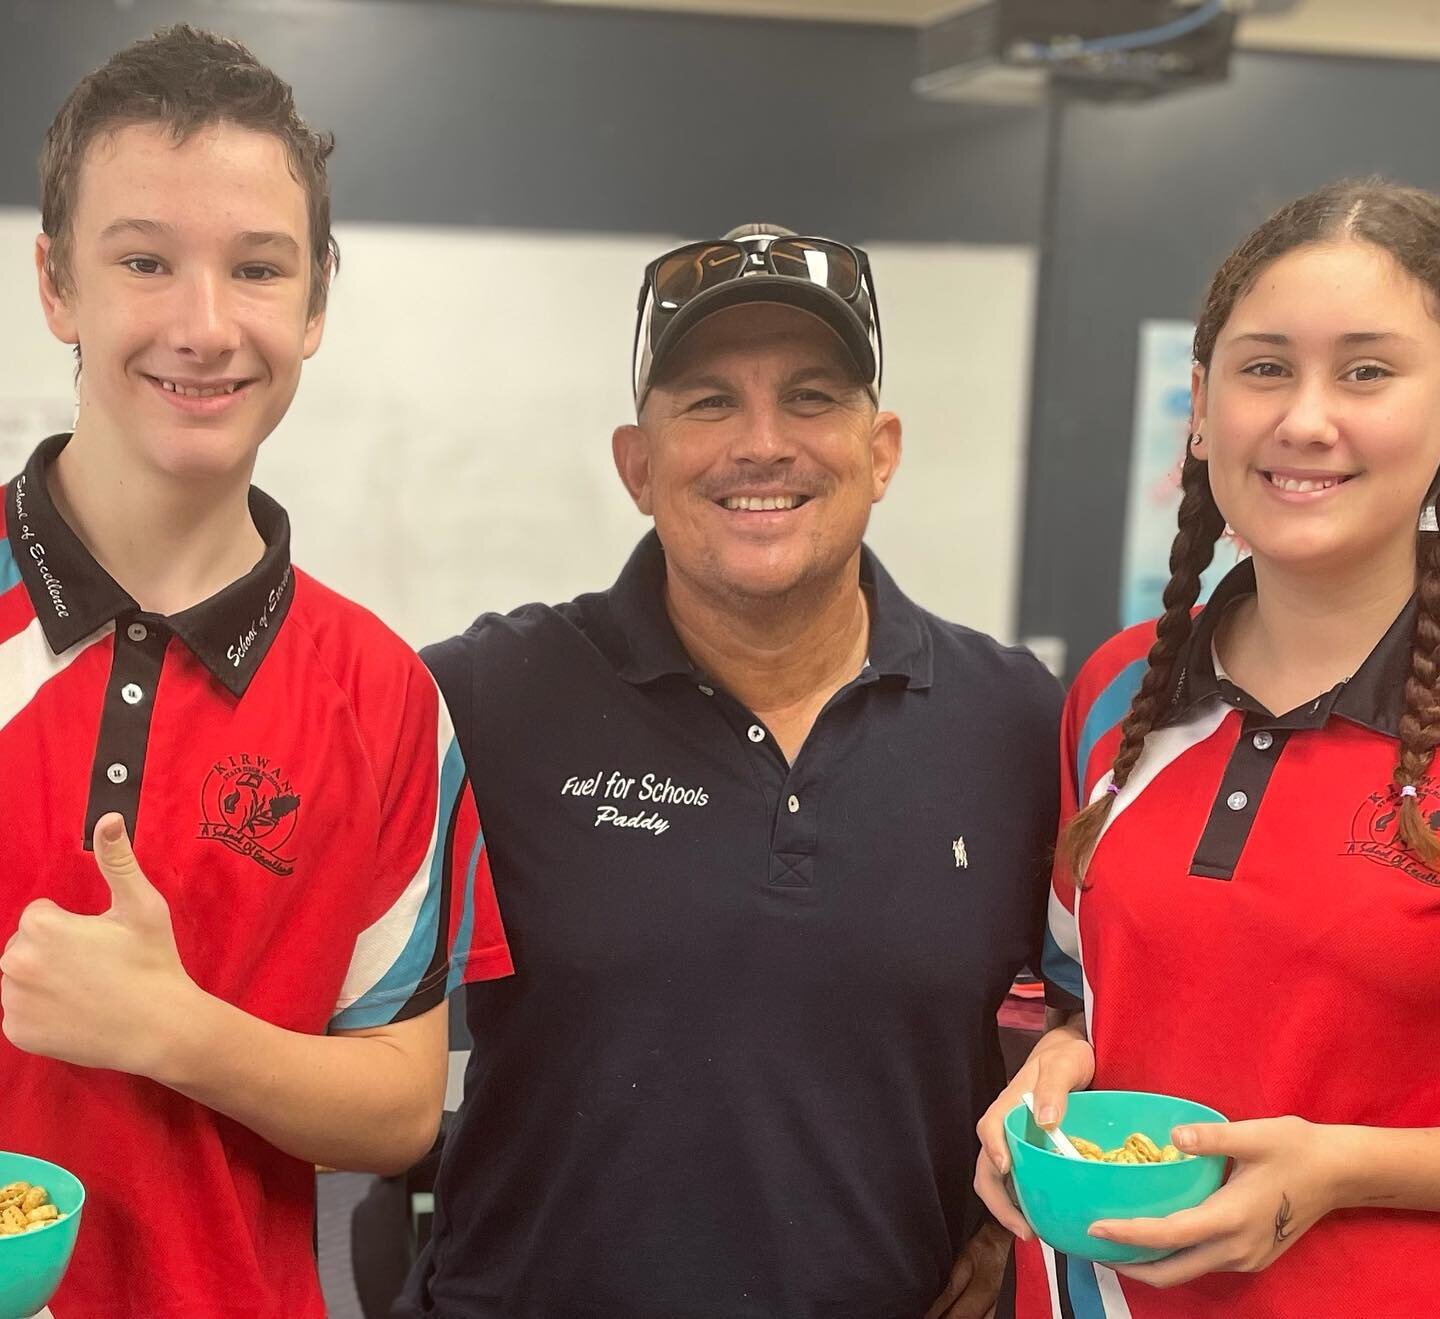 This morning is was lucky enough to have breakfast with the students at Kirwan State High 

Lisa who runs the breakfast program is seriously amazing and you can tell how much providing breakfast to these kids means to her. 

Thank you for having us a